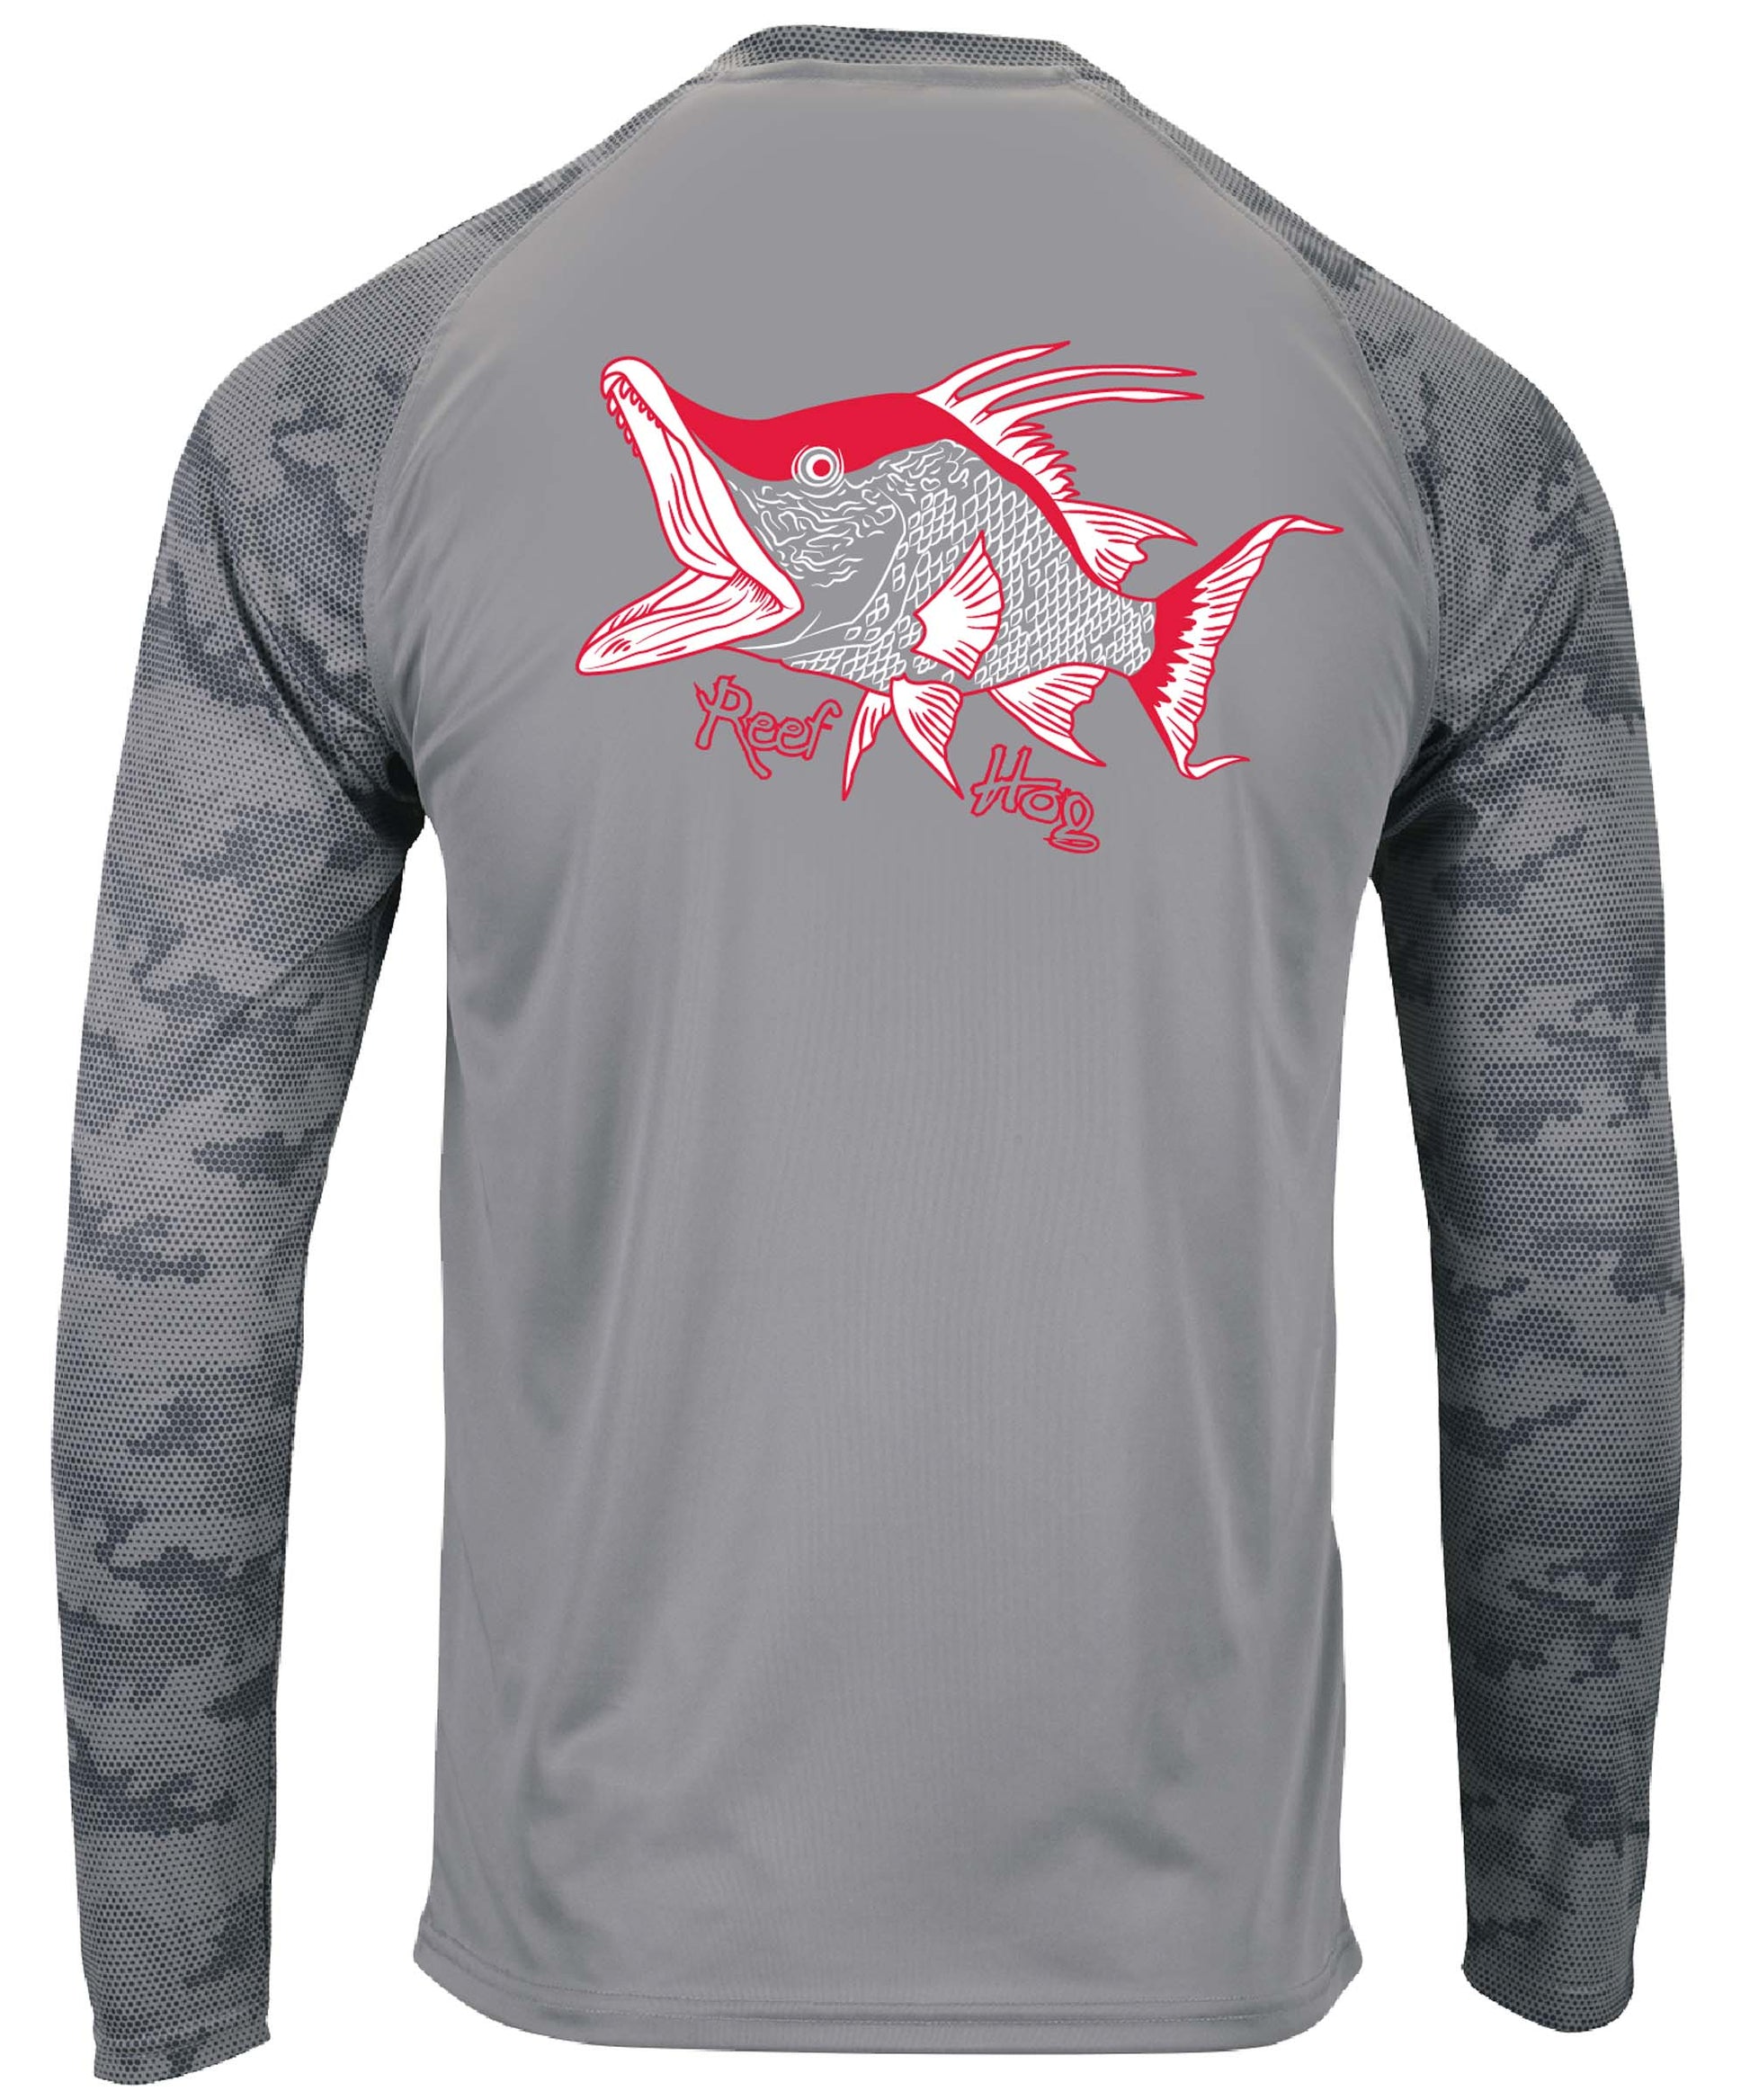 Med Gray Digital Camo Long Sleeve Hogfish Performance Dry-Fit Sun Protection Shirt with 50+ UV Protection by Reel Fishy Apparel